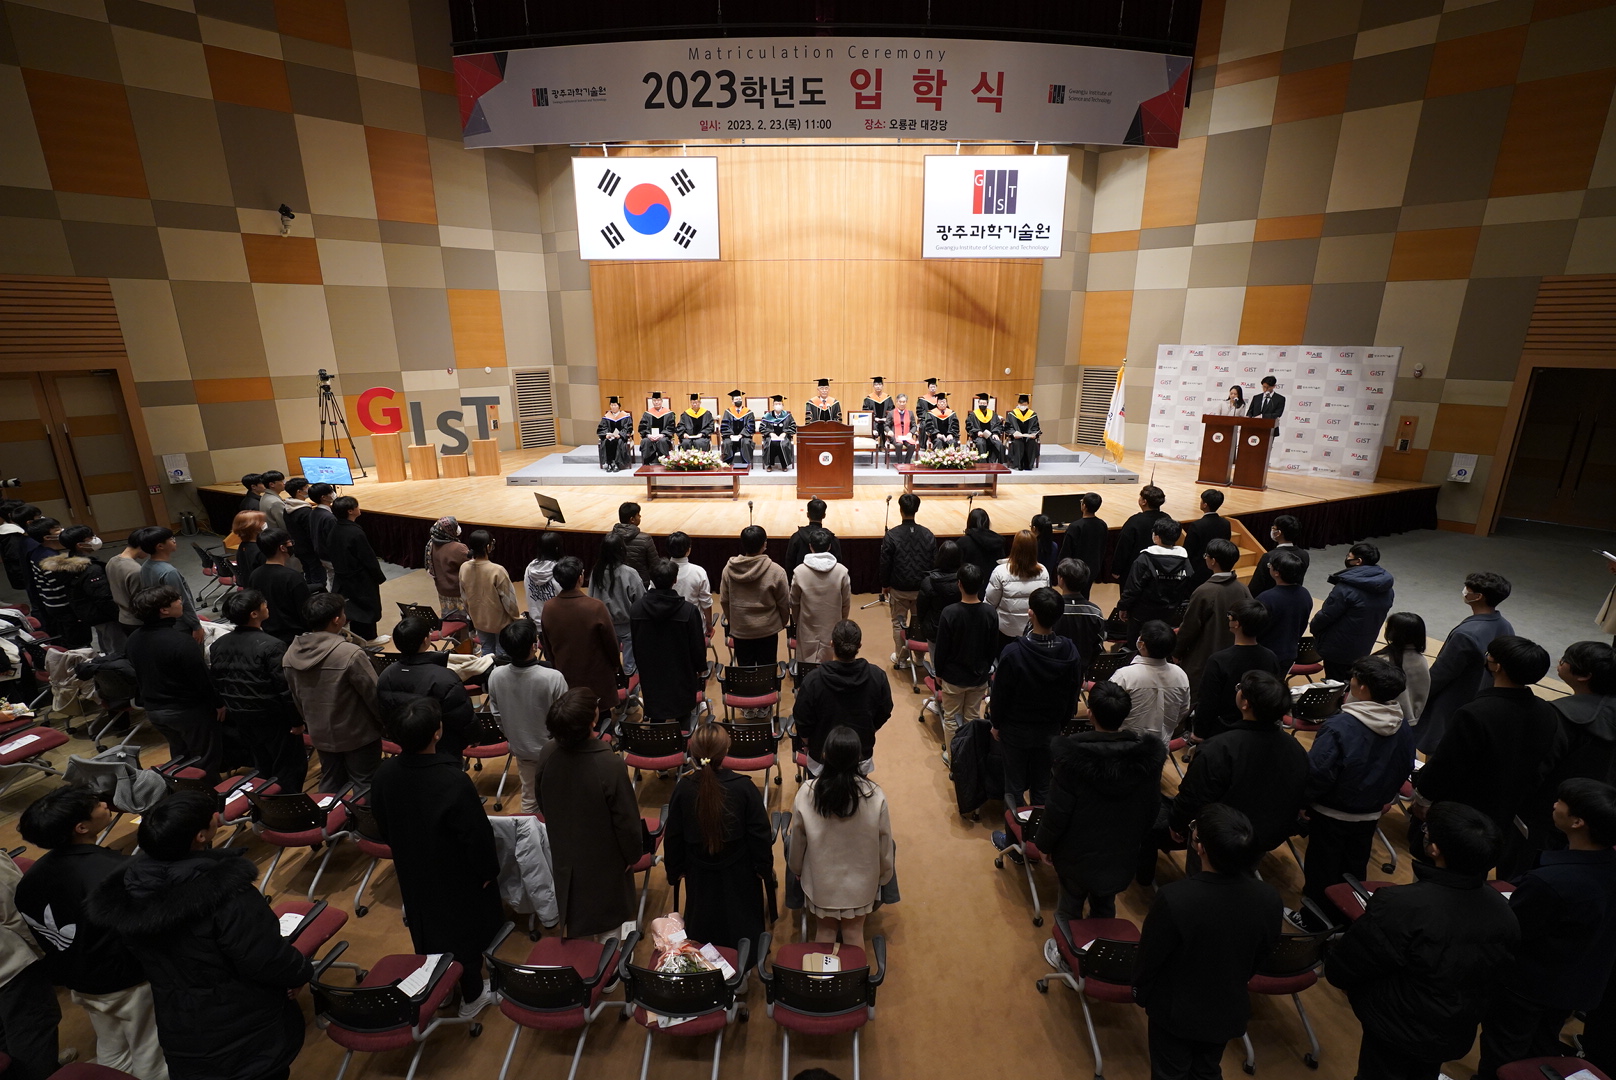 GIST holds face-to-face matriculation ceremony for the first time in 4 years 이미지